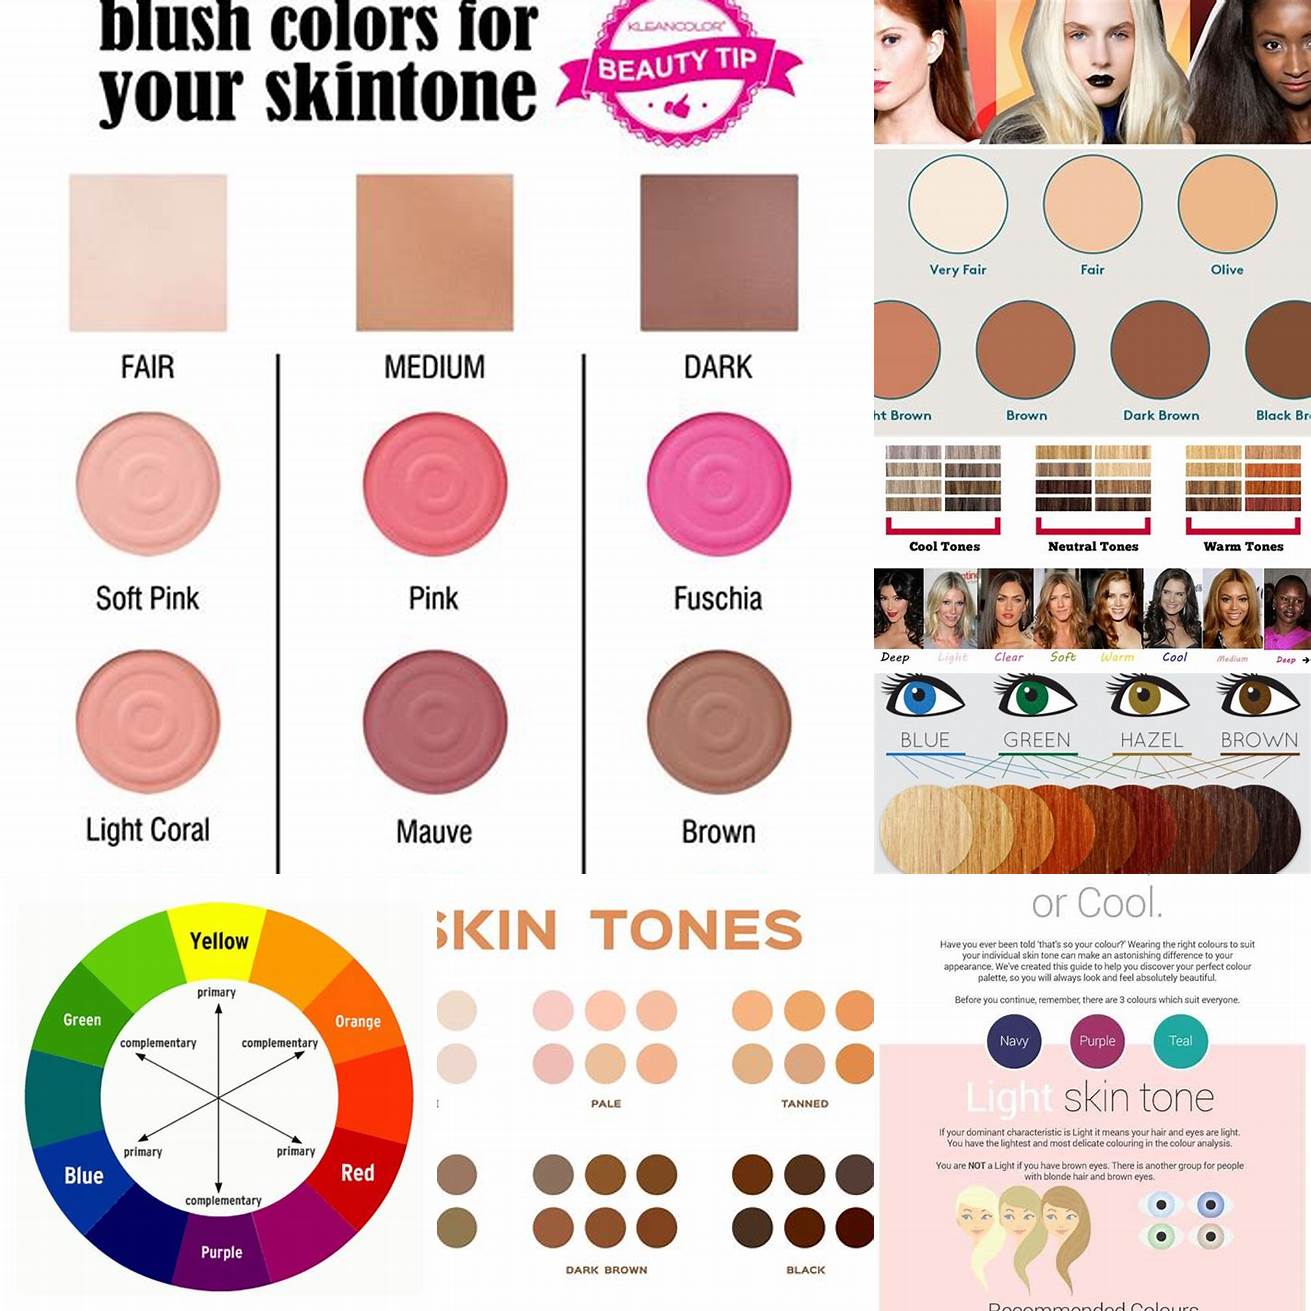 1 Choose a color that compliments your skin tone